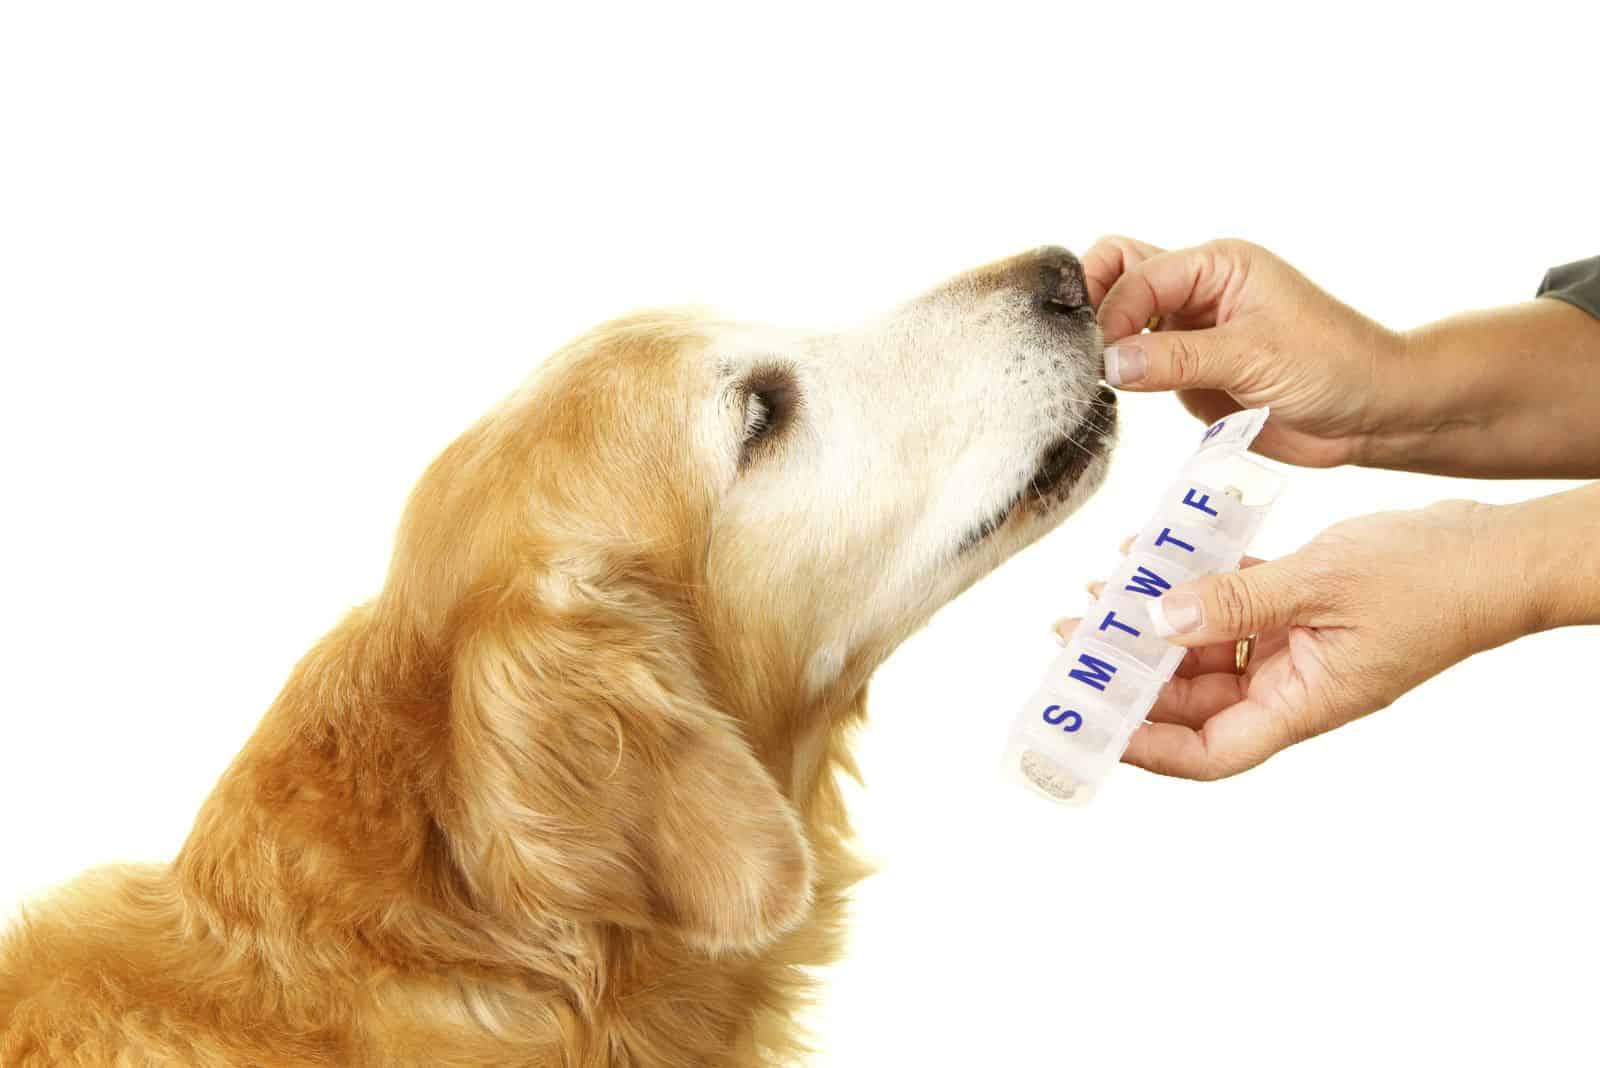 11 Reasons Why Your Dog Needs Probiotics